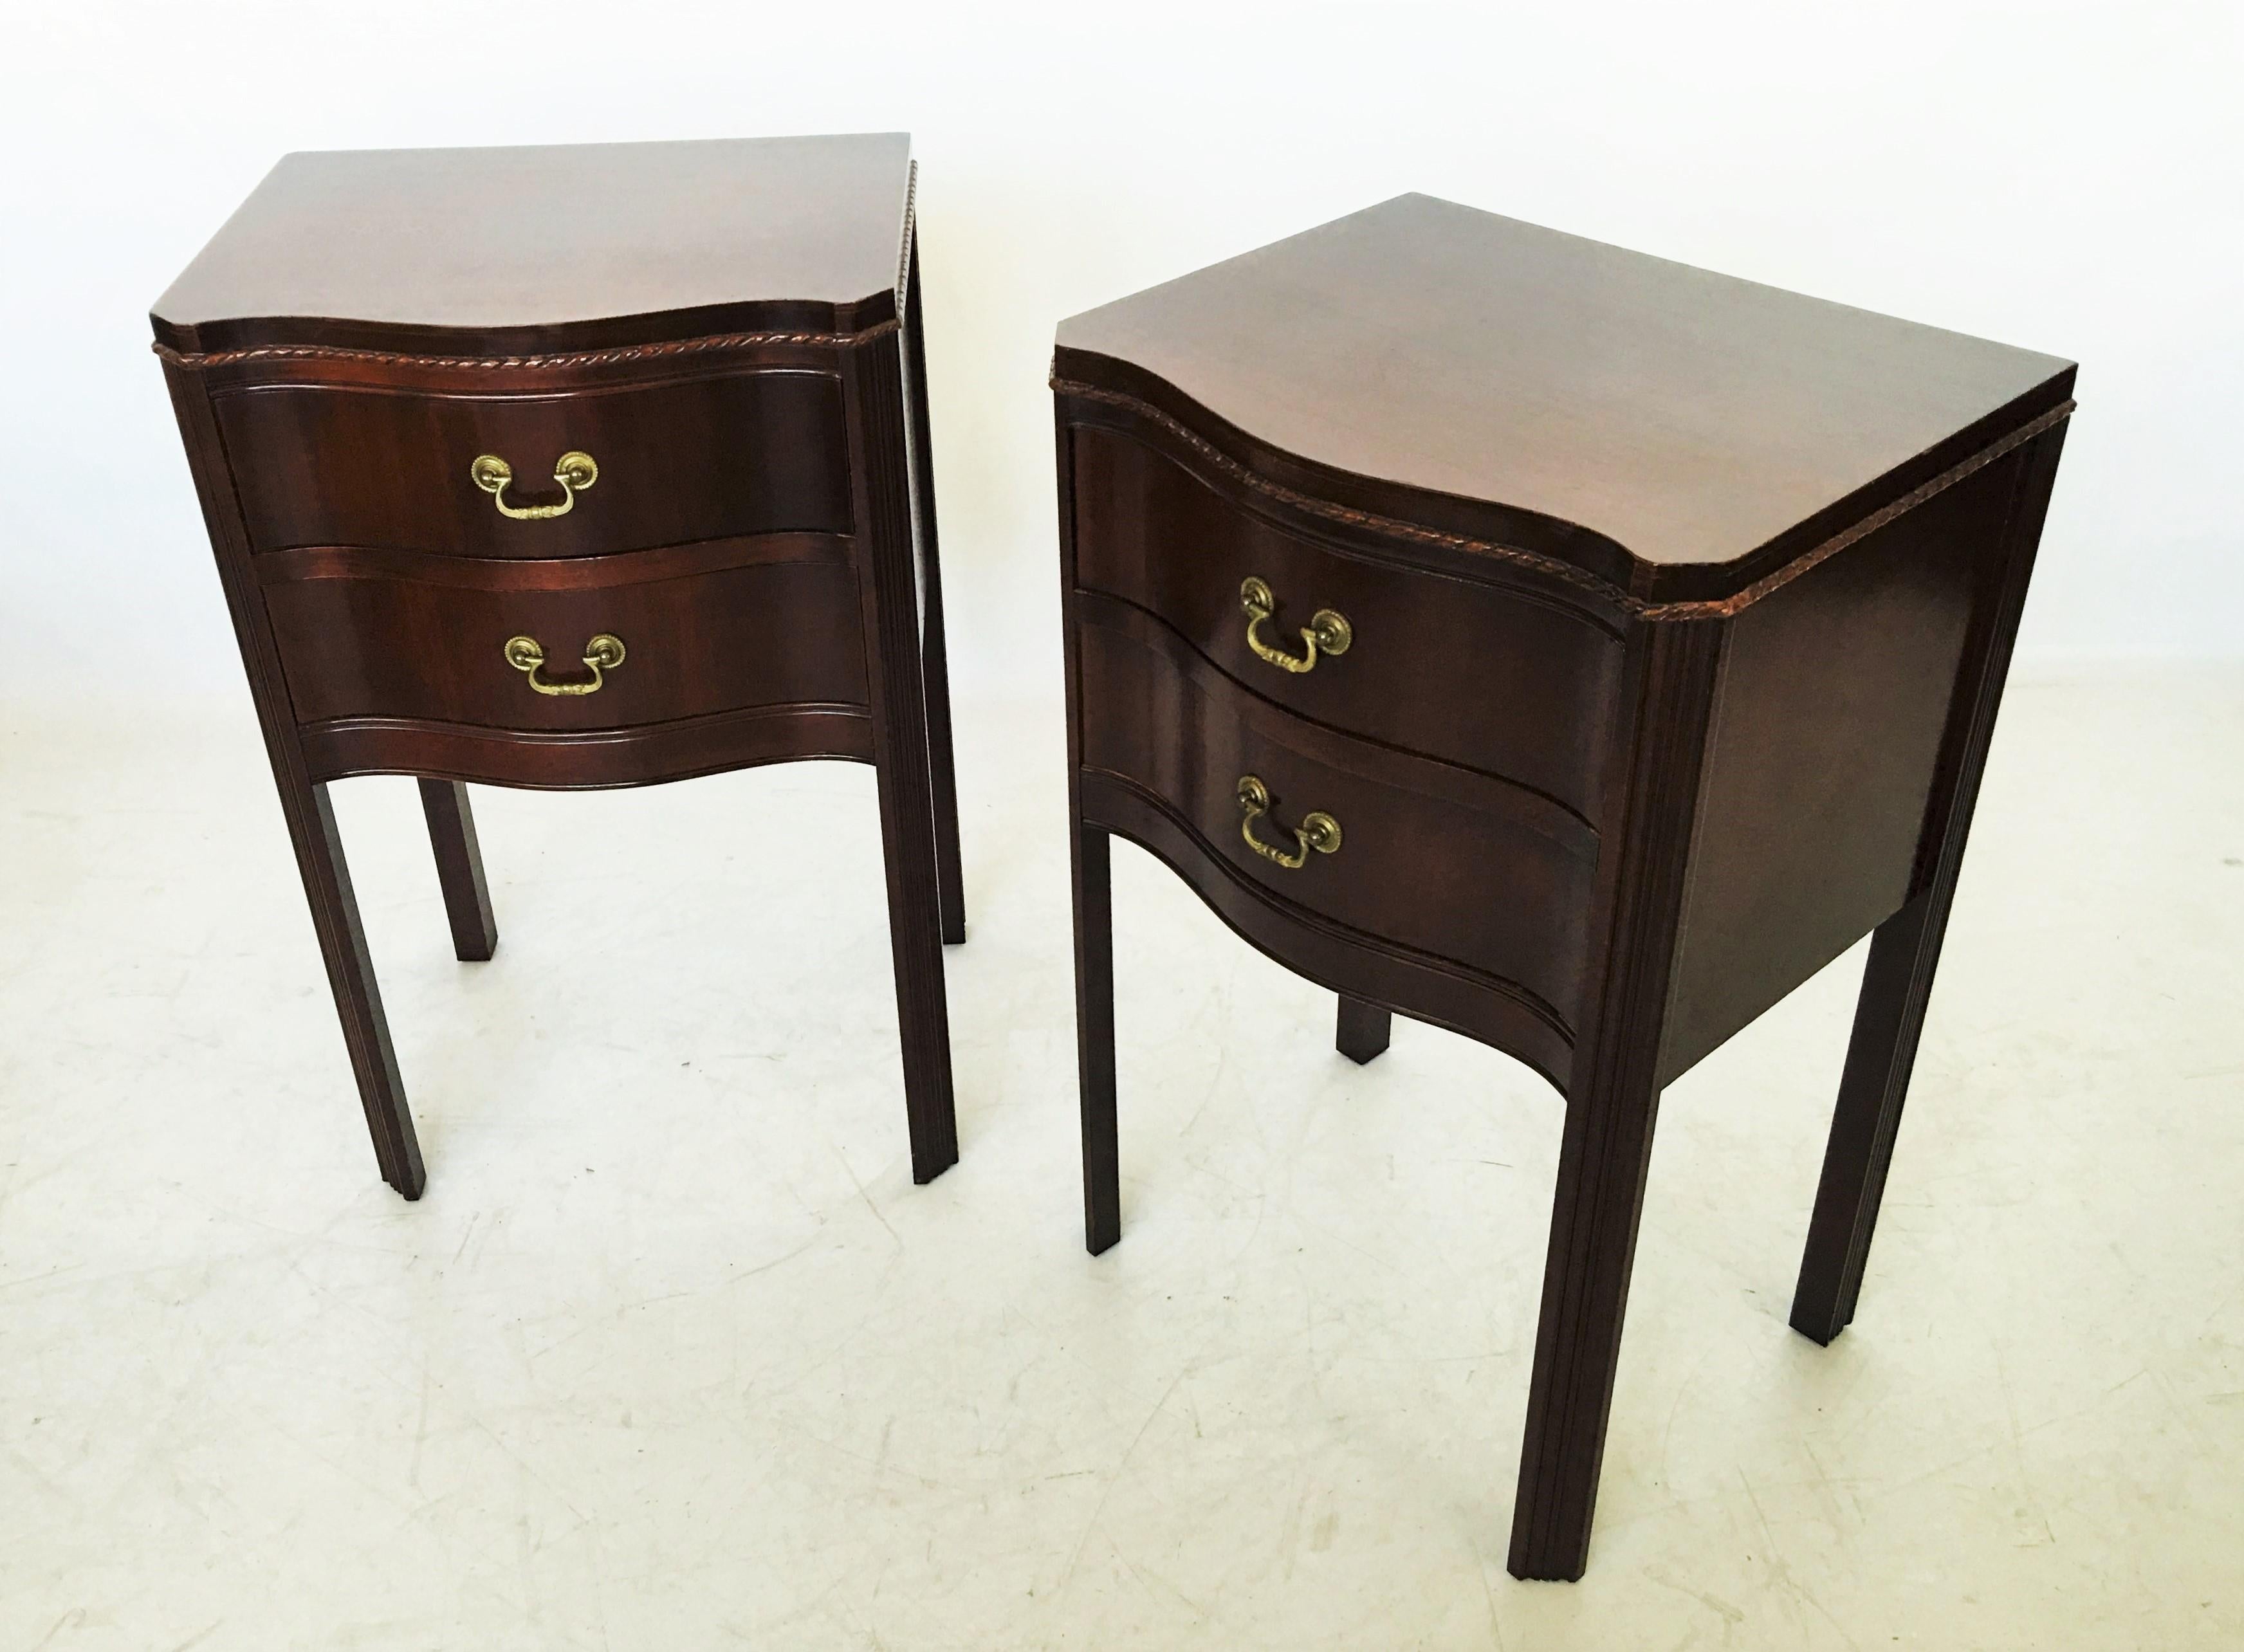 A fine pair of Georgian mahogany commodes made by the Wabash Cabinet Company in Wabash, Indiana circa 1940s. The tables are constructed from the finest quality mahogany wood. Featuring a serpentine front with a carved gadrooned top edge, two